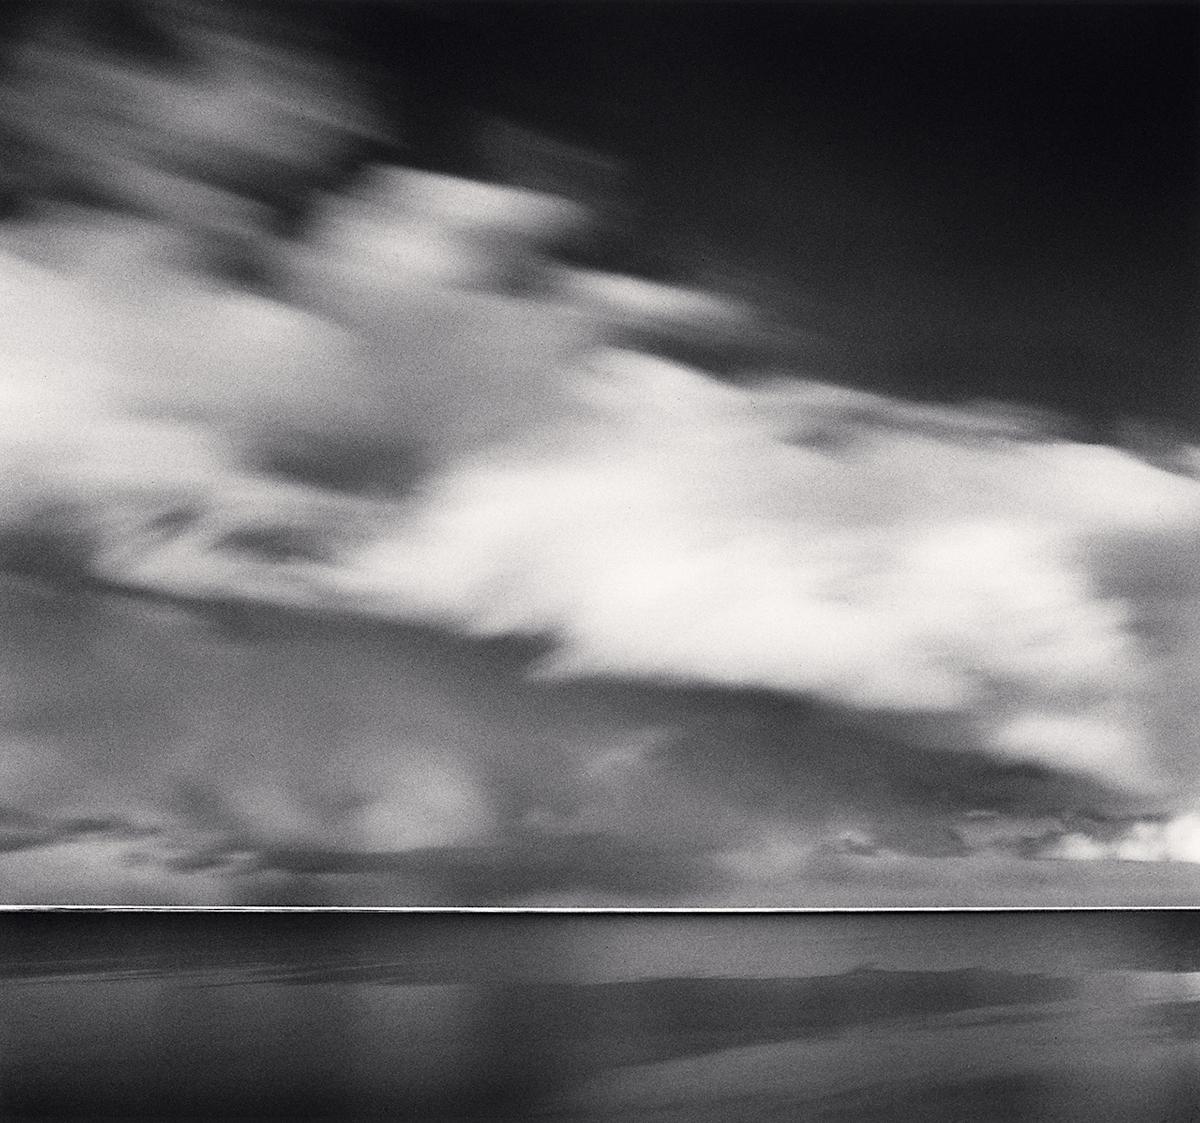 Approaching Ice Floe, Okhosk Sea, Hokkaido, Japan by Michael Kenna is a 7.75 x 7.75 inch* silver gelatin print, available in an edition of 25.
*Please note: the measurements of this print are approximated
This photograph is signed, titled, negative